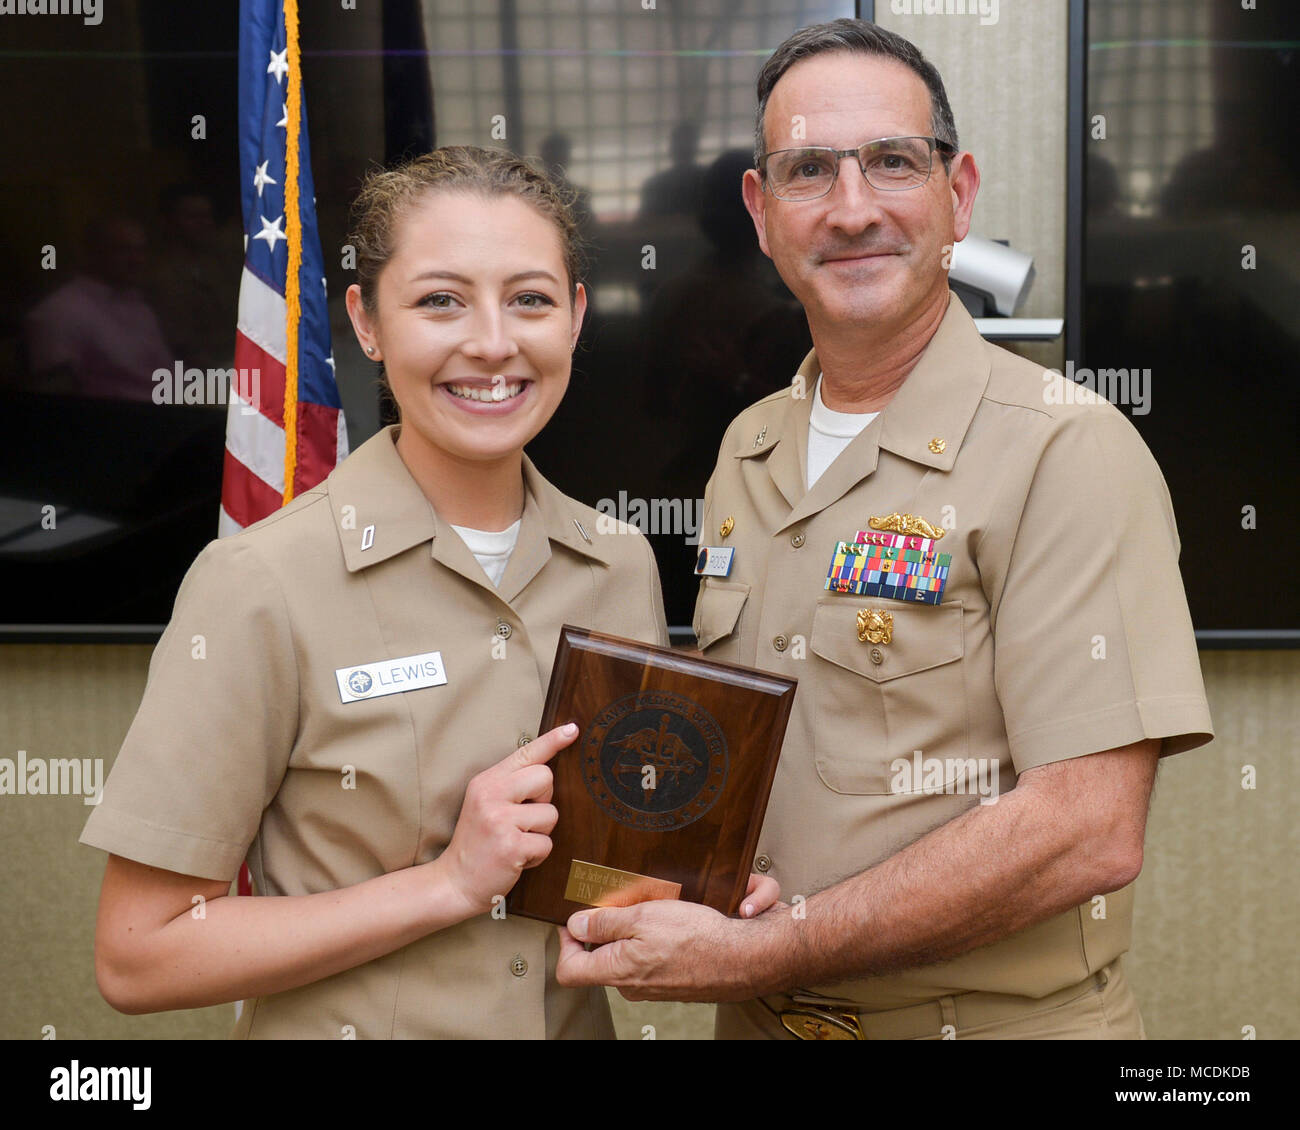 180216-N-PN275-1006 SAN DIEGO (Feb. 16, 2018) CAPT. Joel Roos, Naval Medical Center San Diego Commanding Officer,  presents Hospital Corpsman Jasmine Lewis with the Bluejacket of the Quarter award. Hospital Corpsman Lewis received the award for her exceptional work and devotion to duty. (U.S. Navy Photo by Mass Communication Specialist 2nd Class Zachary Kreitzer) Stock Photo